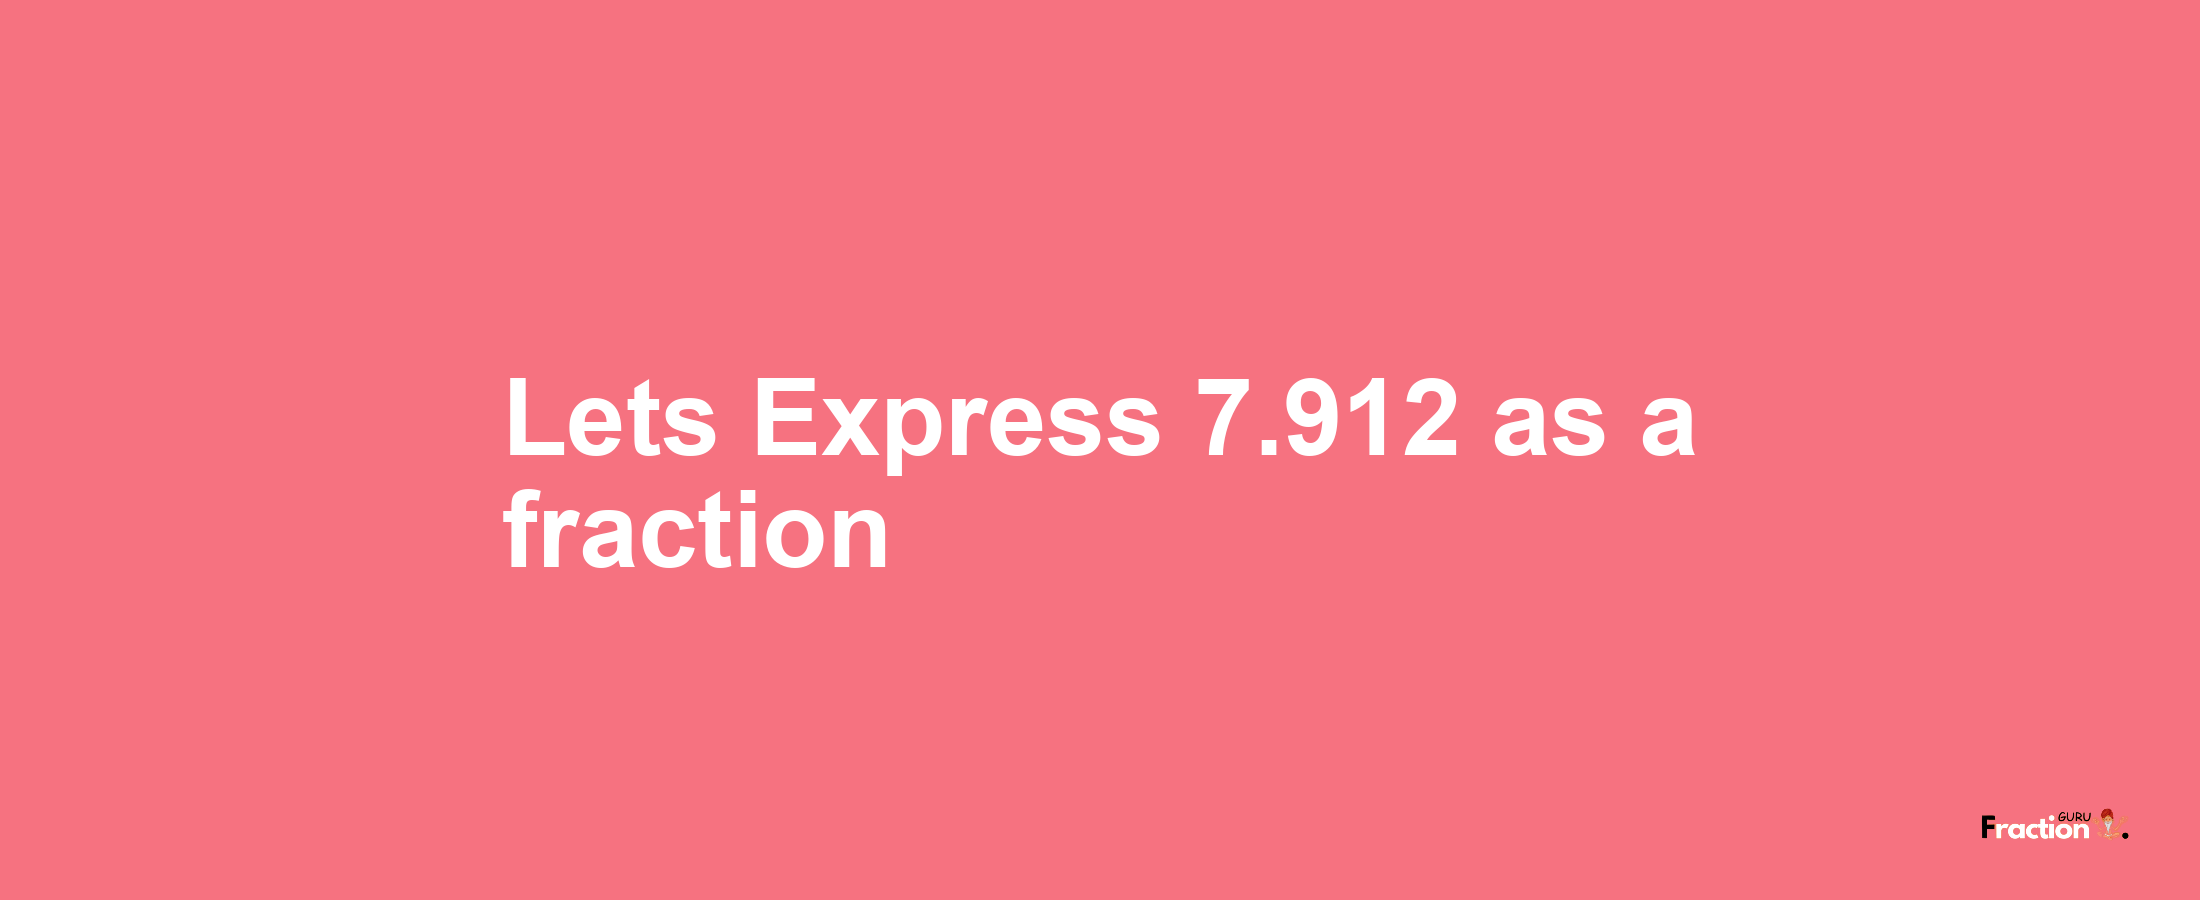 Lets Express 7.912 as afraction